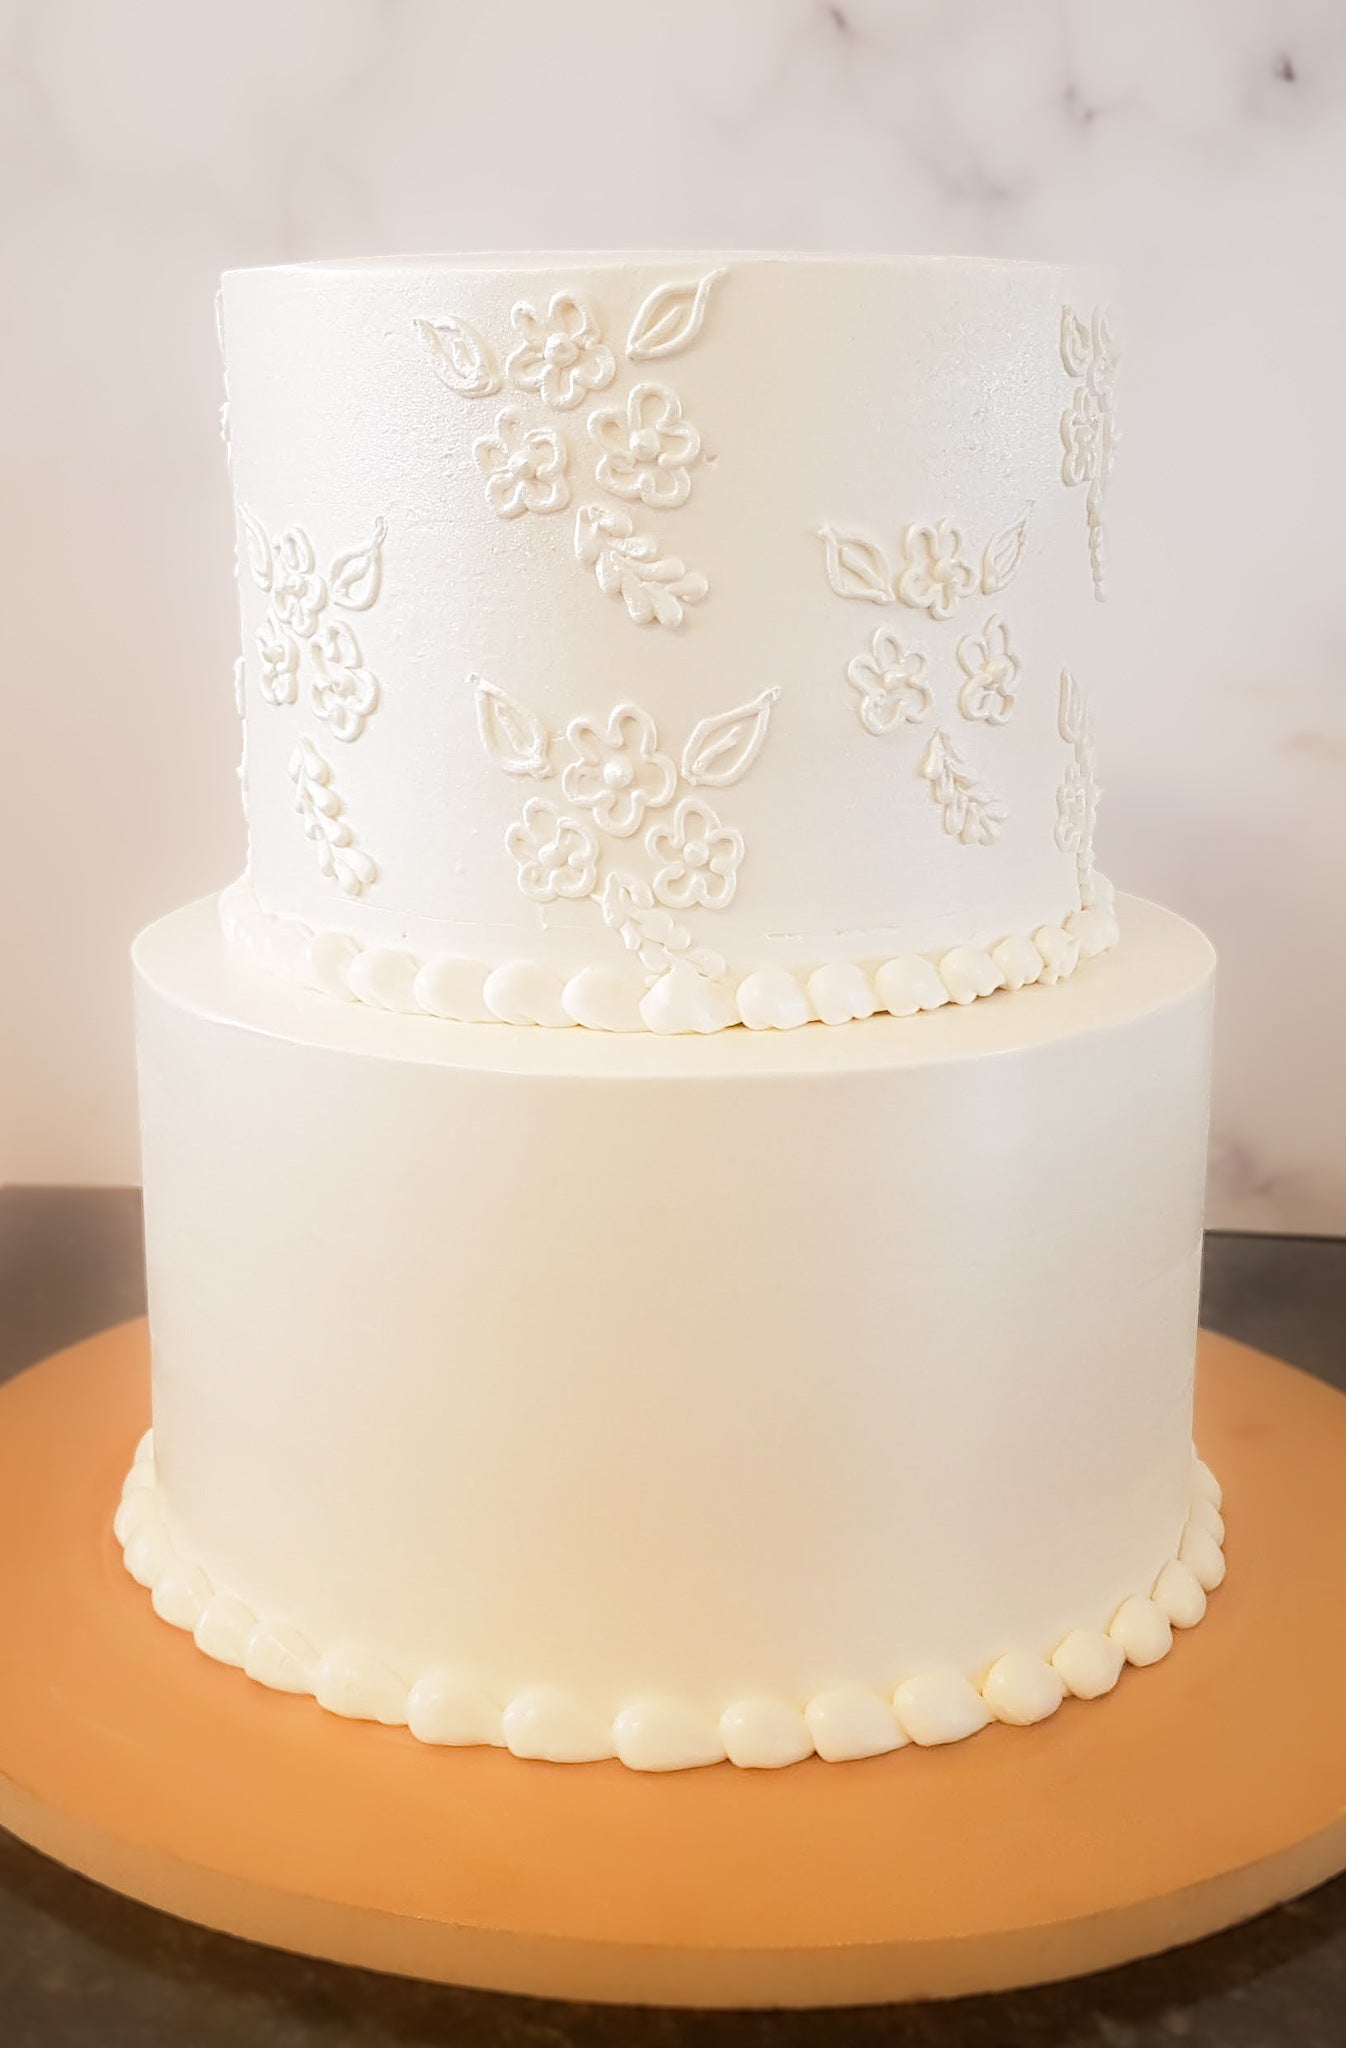 Tiny flowers piped around your cake to show a quiet, simplistic elegance for your special affair. This cake is perfect for baptisms, communions, weddings and intimate gatherings.